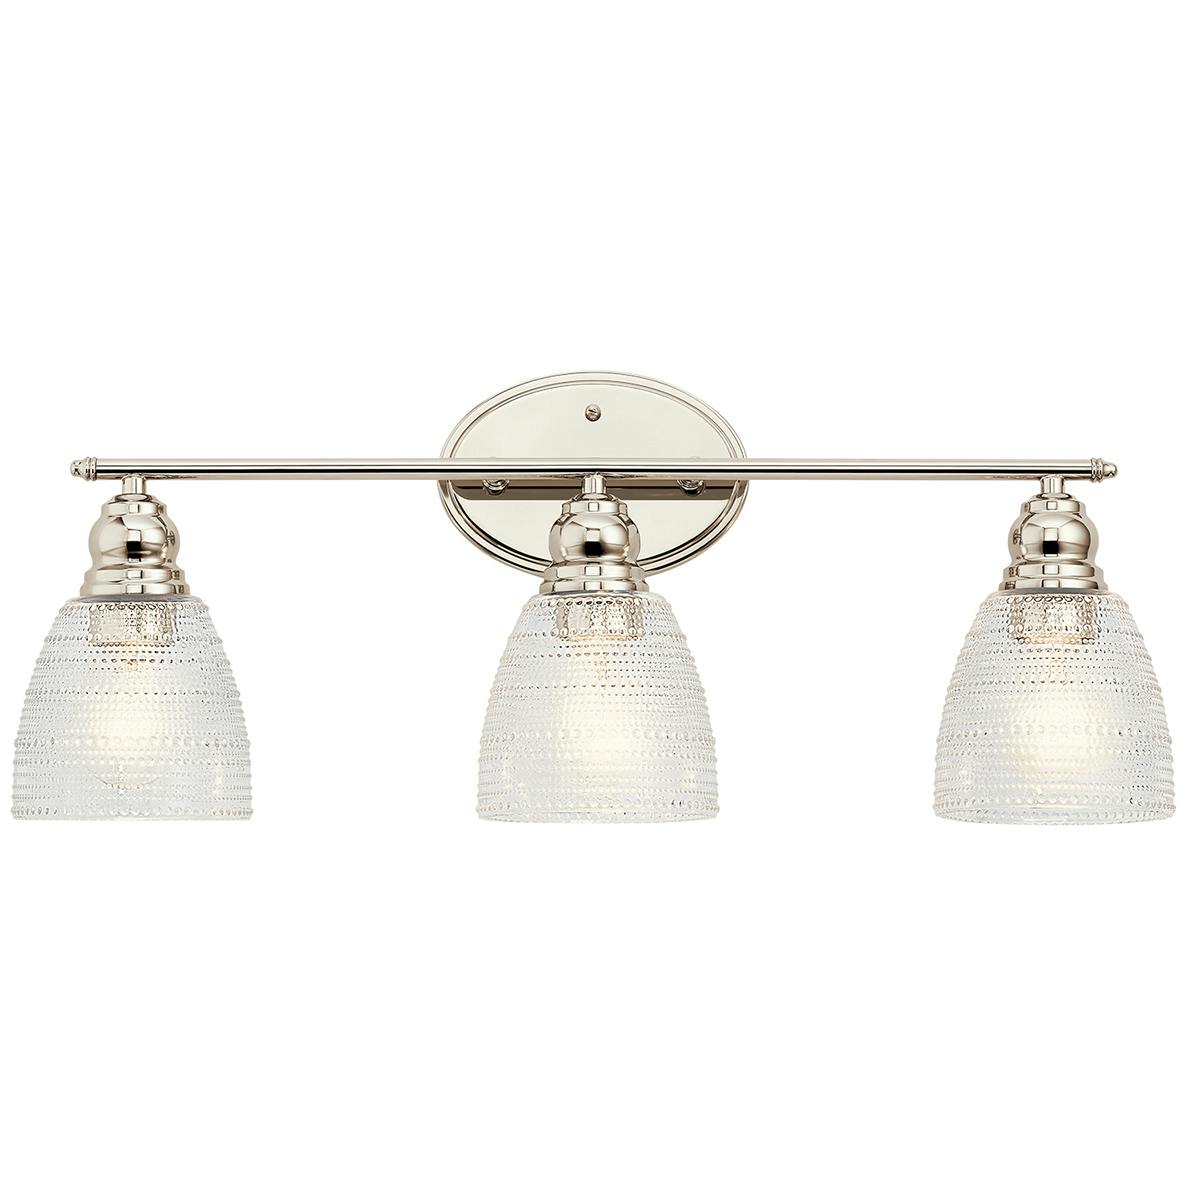 Front view of the Karmarie 3 Light Vanity Light Nickel on a white background